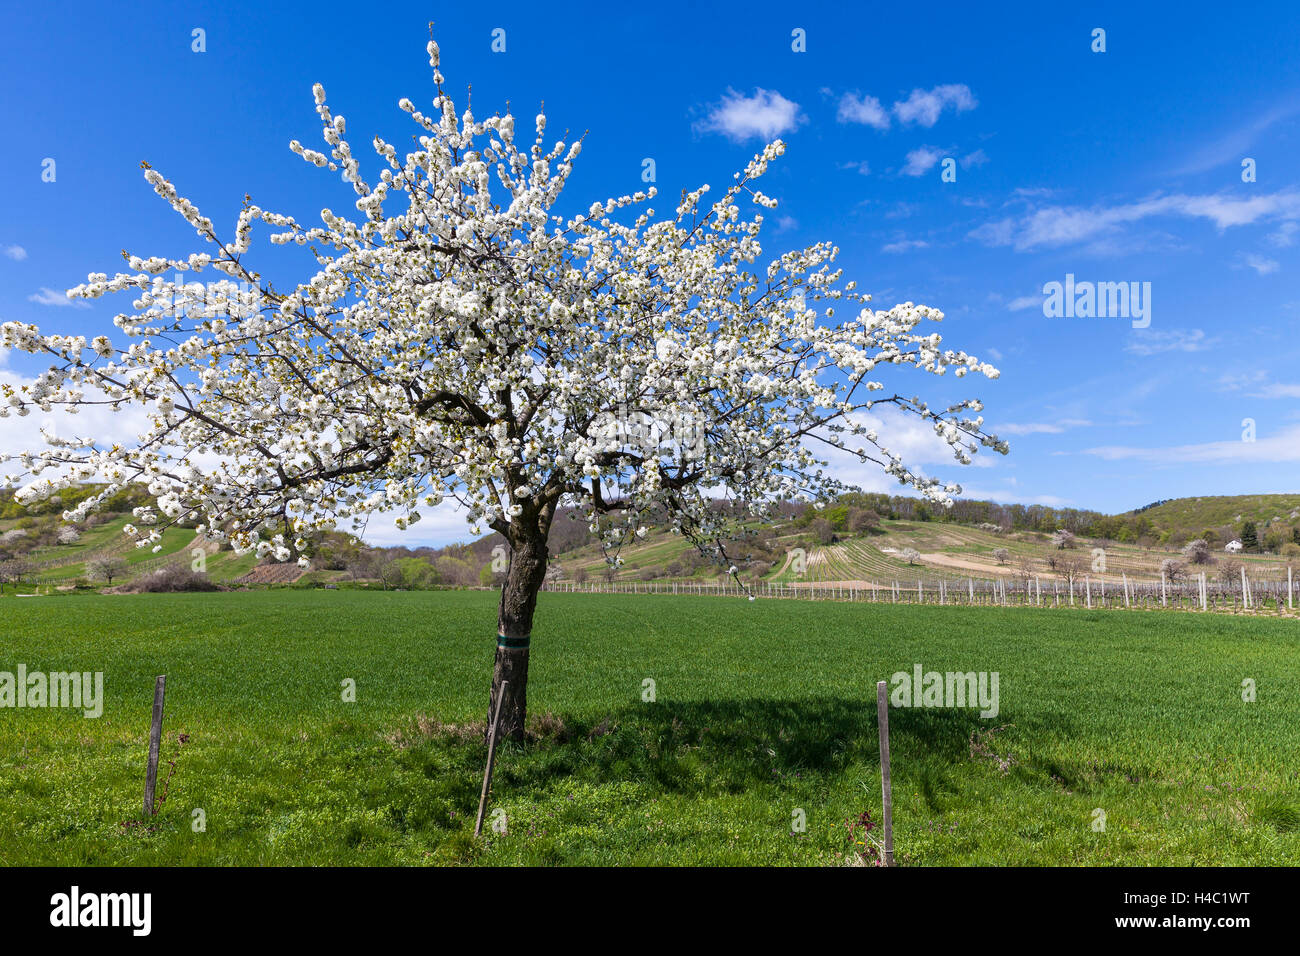 Cherry blossom at the foot of the Leitha Mountains between Donnerskirchen and Purbach, at the cherry blossom cycle track, Burgenland, Austria, Europe, Stock Photo